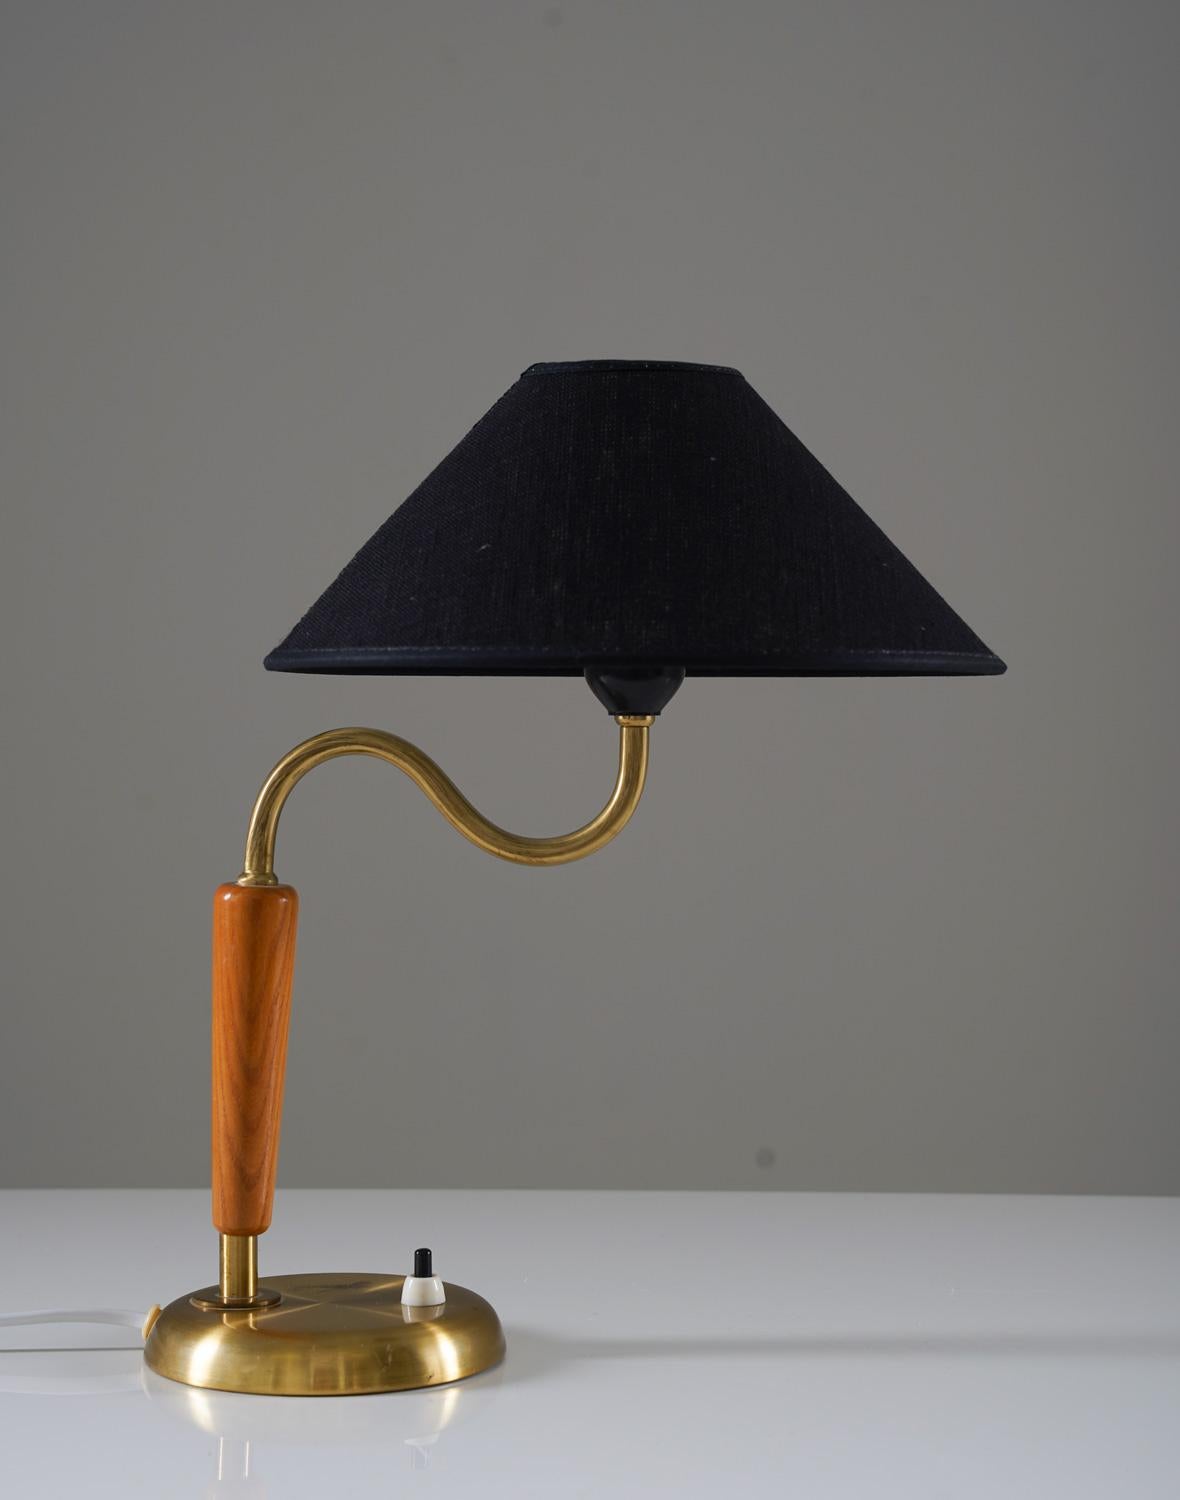 Small table lamp in brass and wood by Böhlmarks, Sweden.
Simple and elegant design, significant for the Swedish modern era

Condition: Very good condition. New shade. 

***
Please note that, because of the current state of world affairs, we